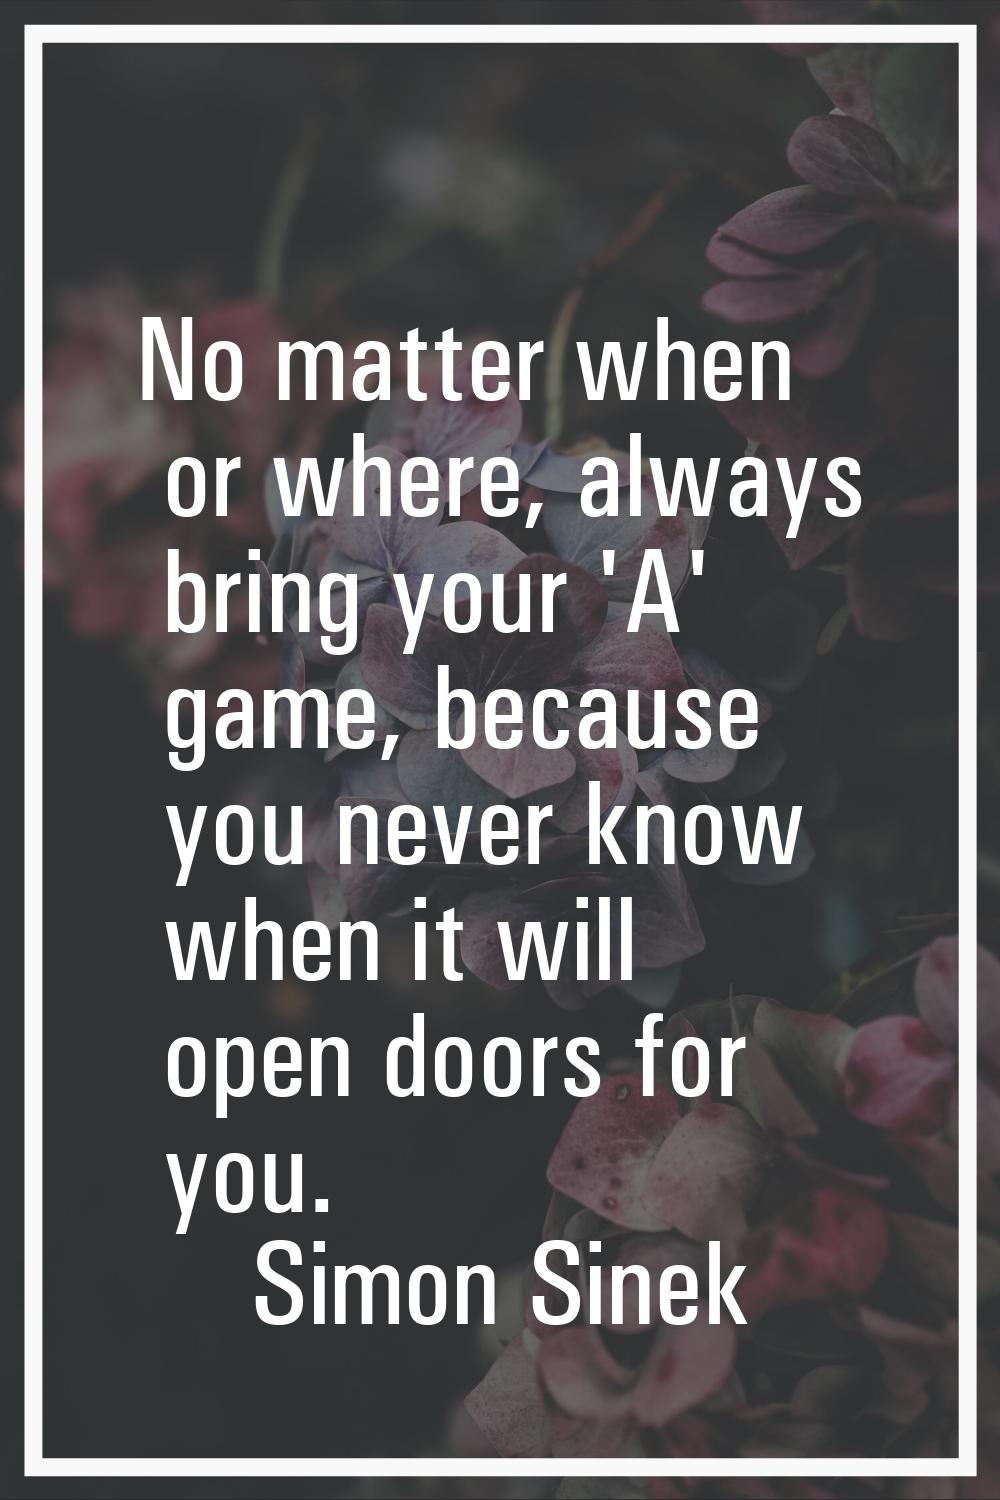 No matter when or where, always bring your 'A' game, because you never know when it will open doors